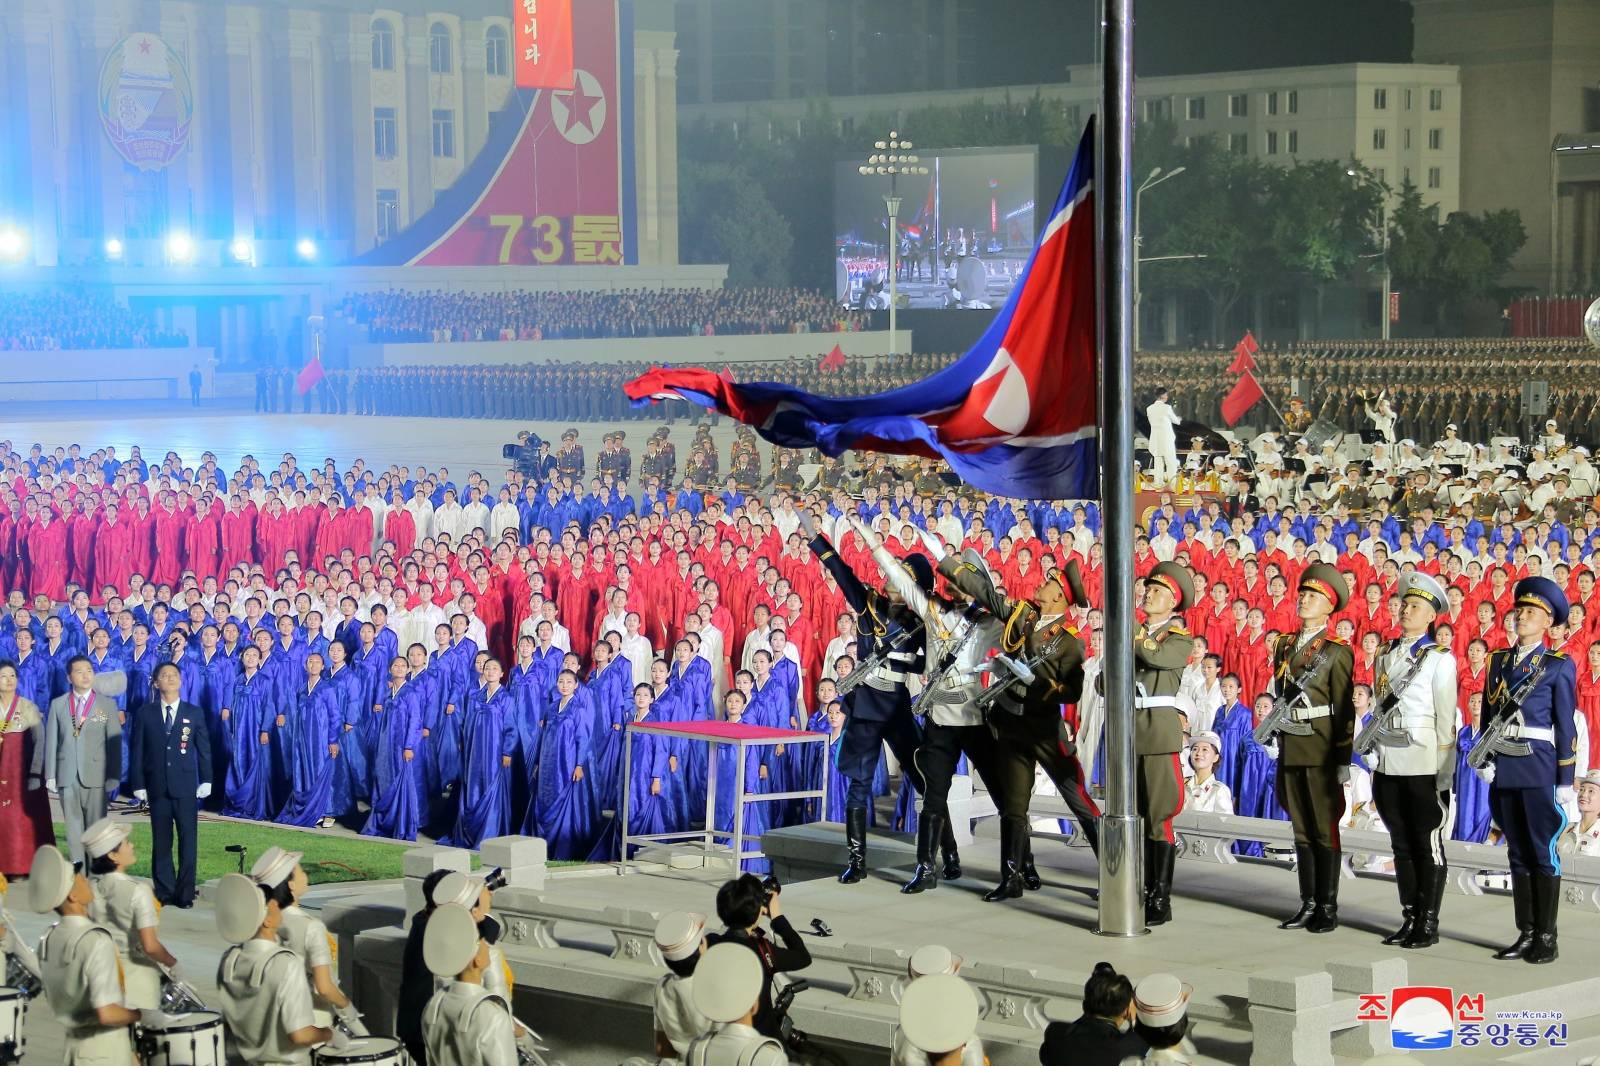 Paramilitary parade held to mark the founding anniversary of the republic at Kim Il Sung square in Pyongyang